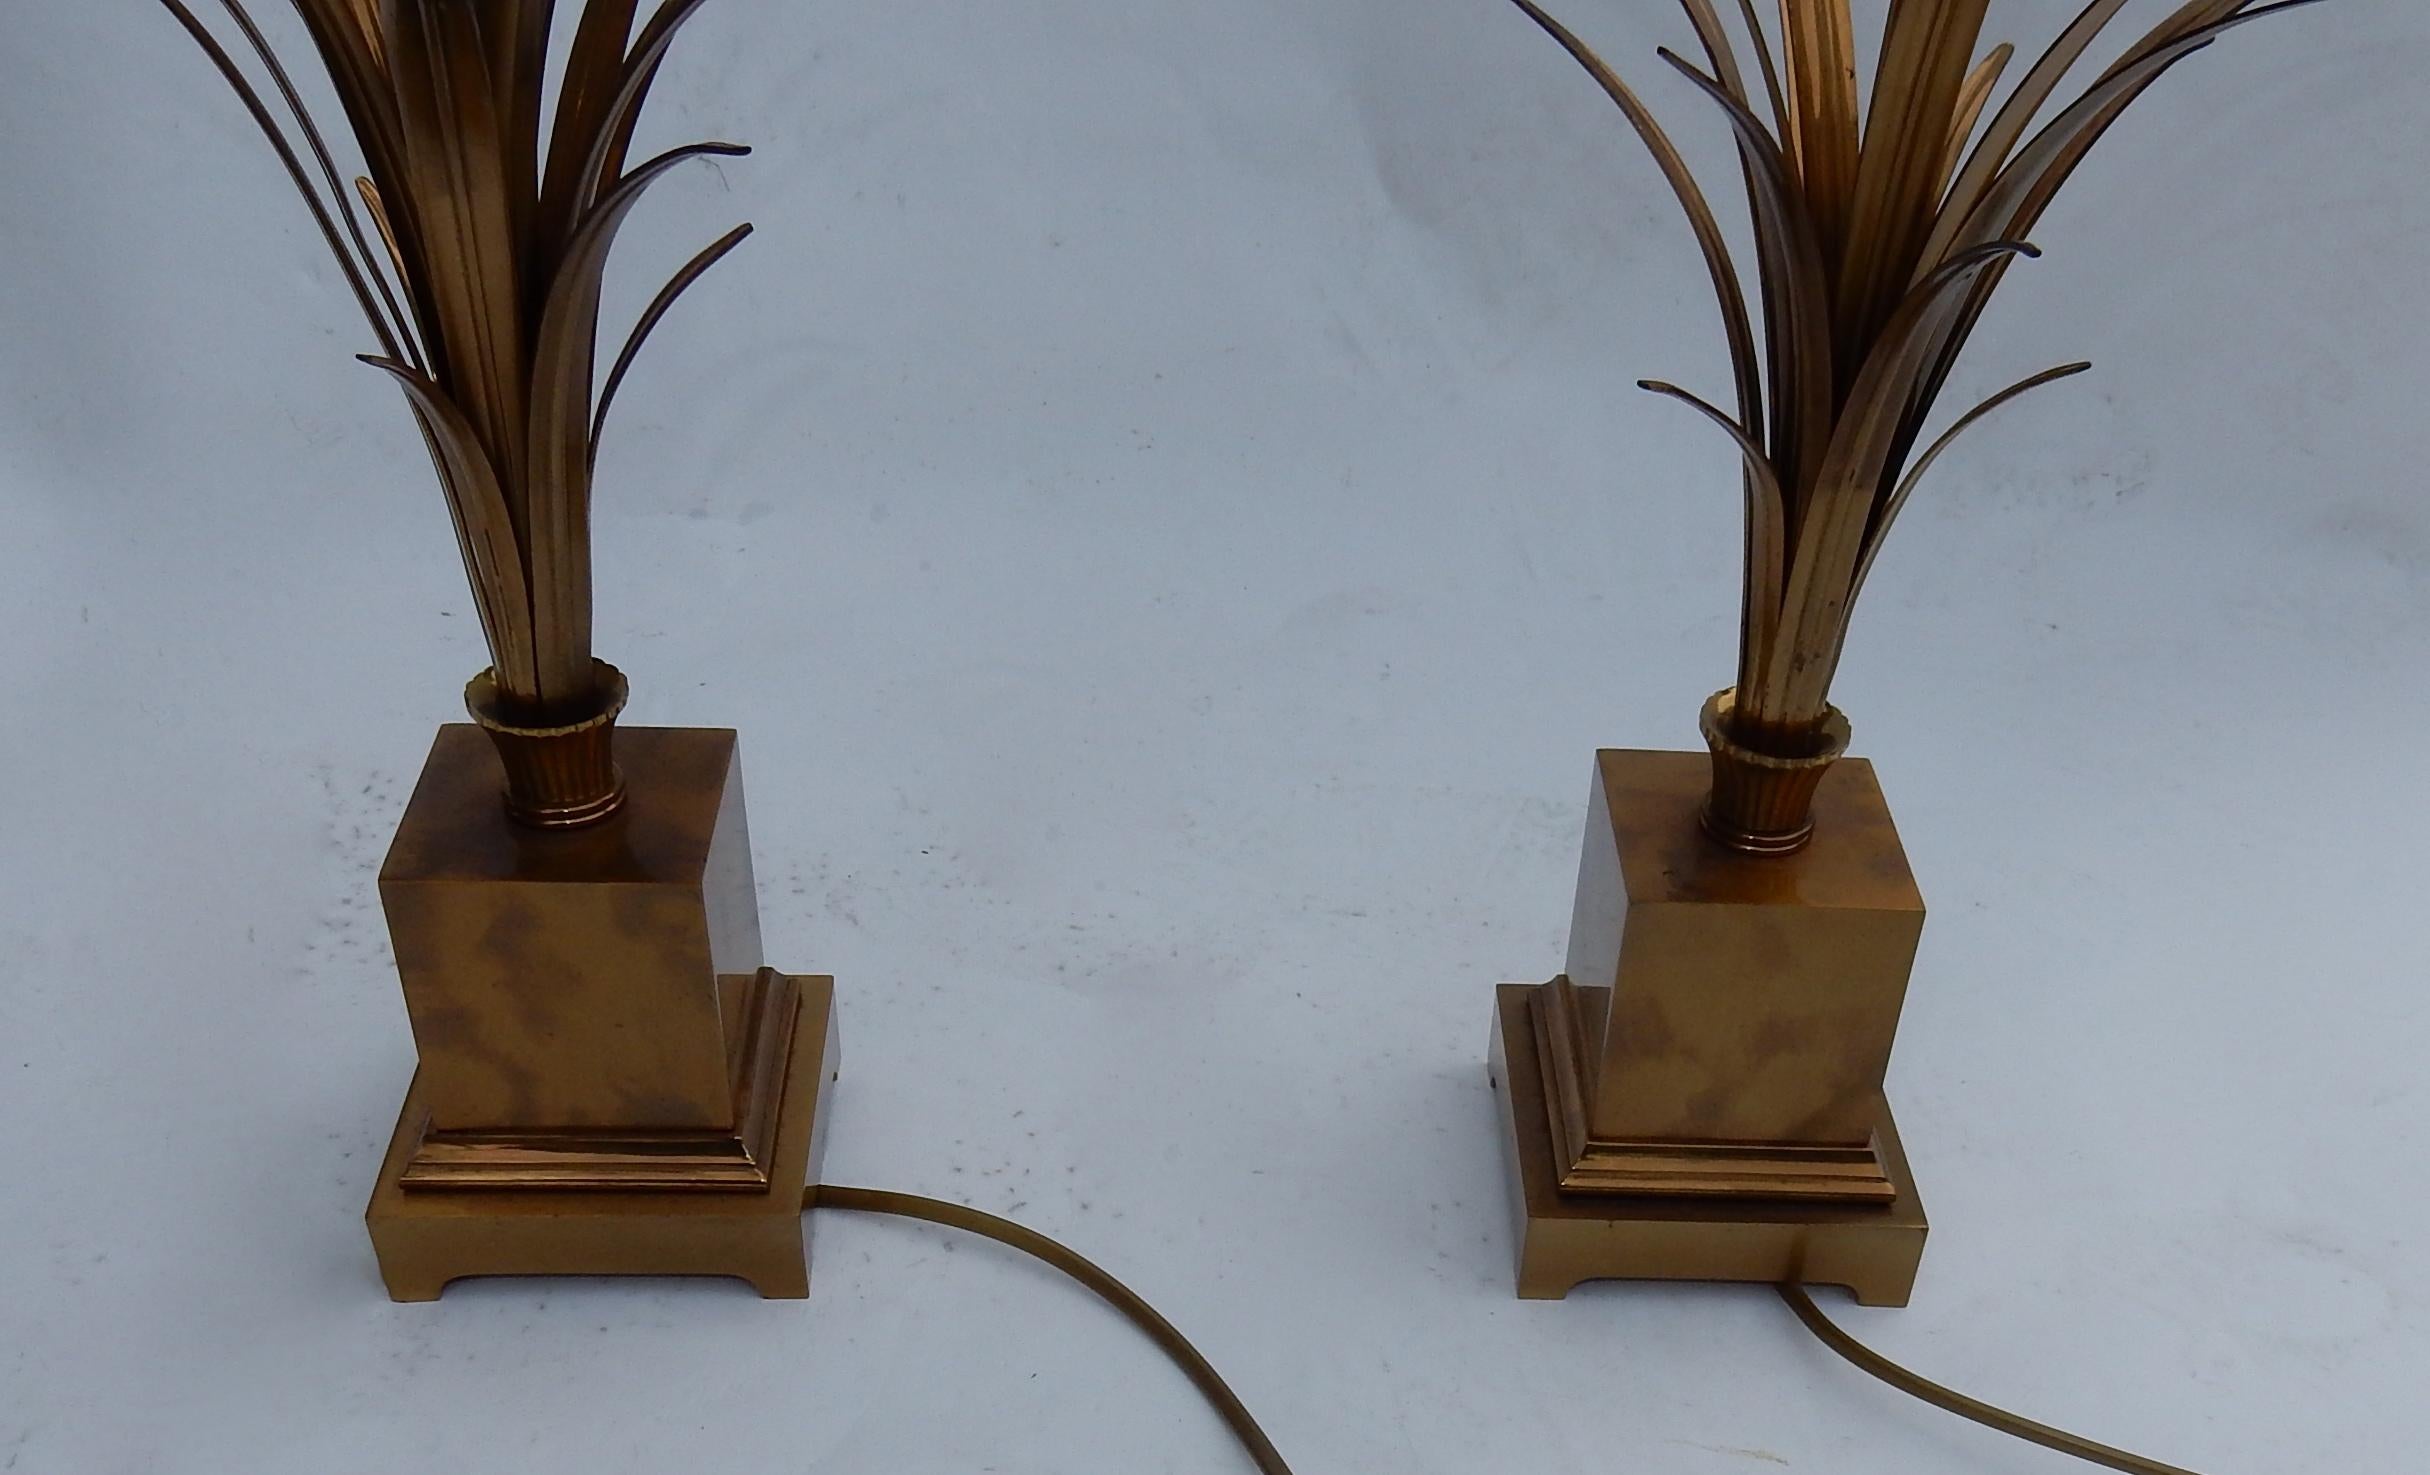 Pair of lamps signed Charles made in France, gilded bronze and brass structure, can be adjusted to 5 cm higher height, 3 bulbs with large base, good condition, circa 1970
Measures: Height 68 cm + 5
Diameter 23 cm
Base: 10 x 10 x H 11 cm
These